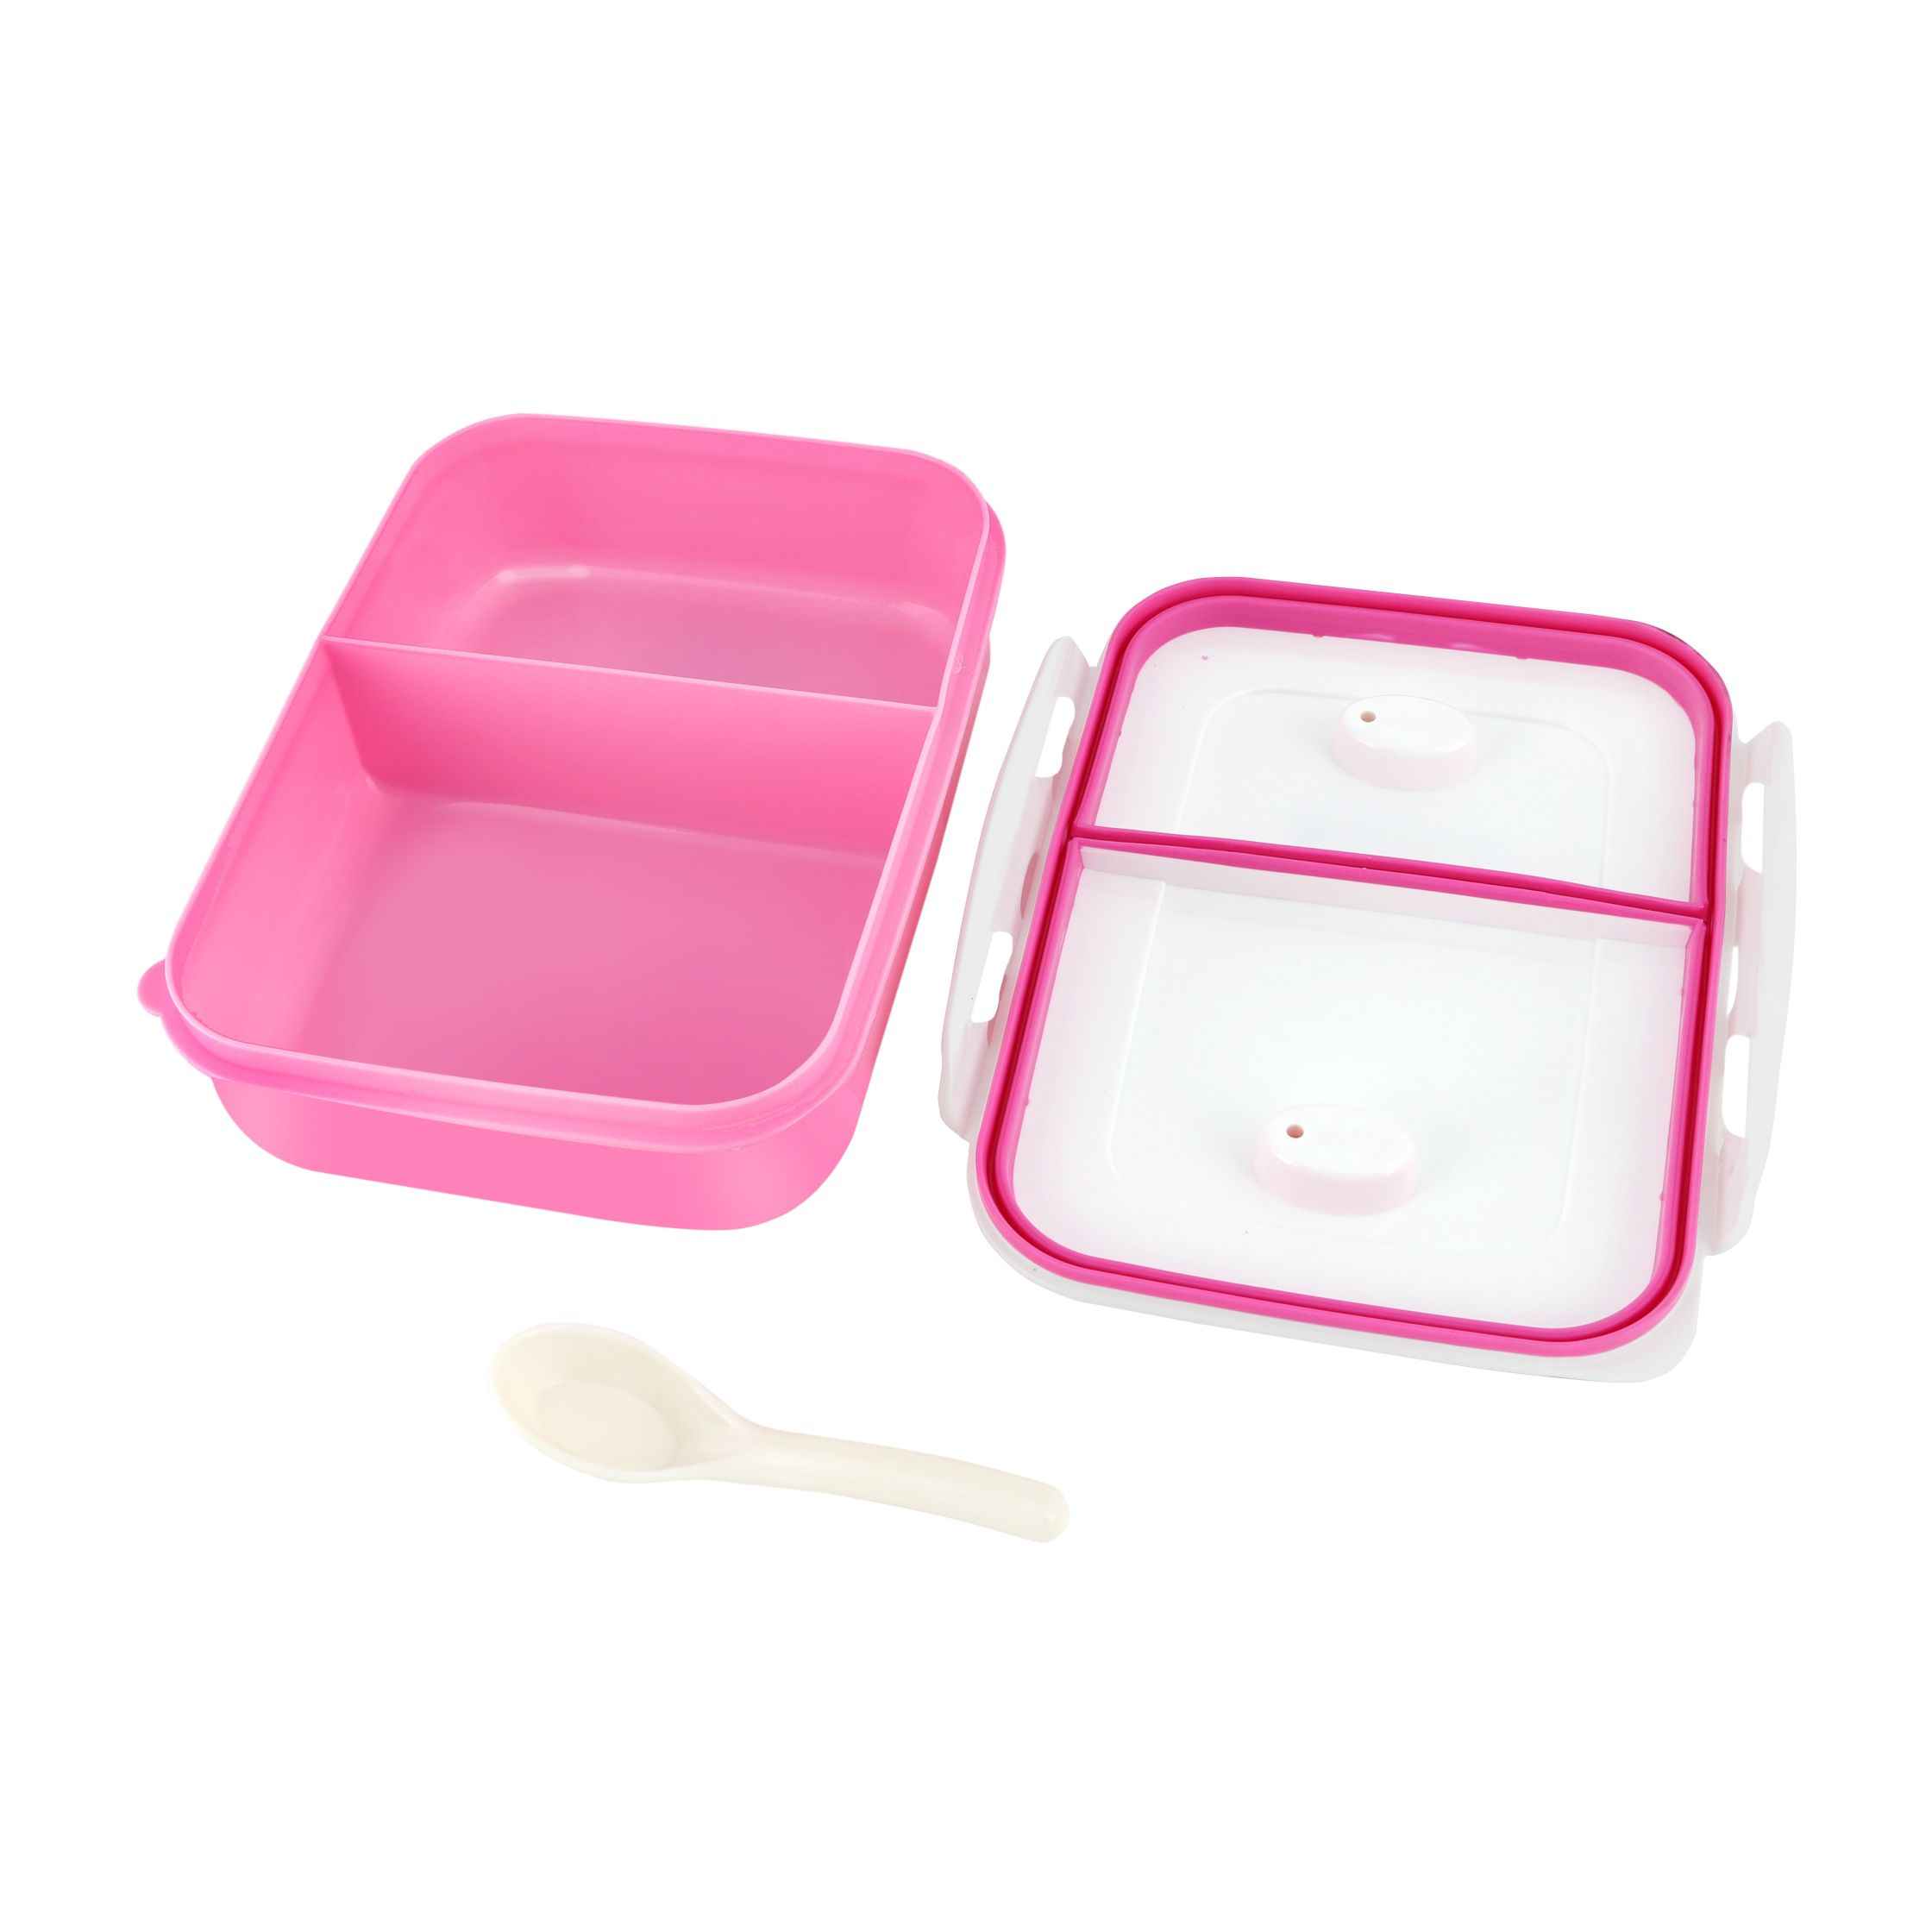 Royalford Rf4398Pn Air Tight Lunch Box/Pink - Durable & Airtight Lid| Ideal For Carrying Snacks, Lunch & Dinner To Office, Home. Sports Ground, Gym & More